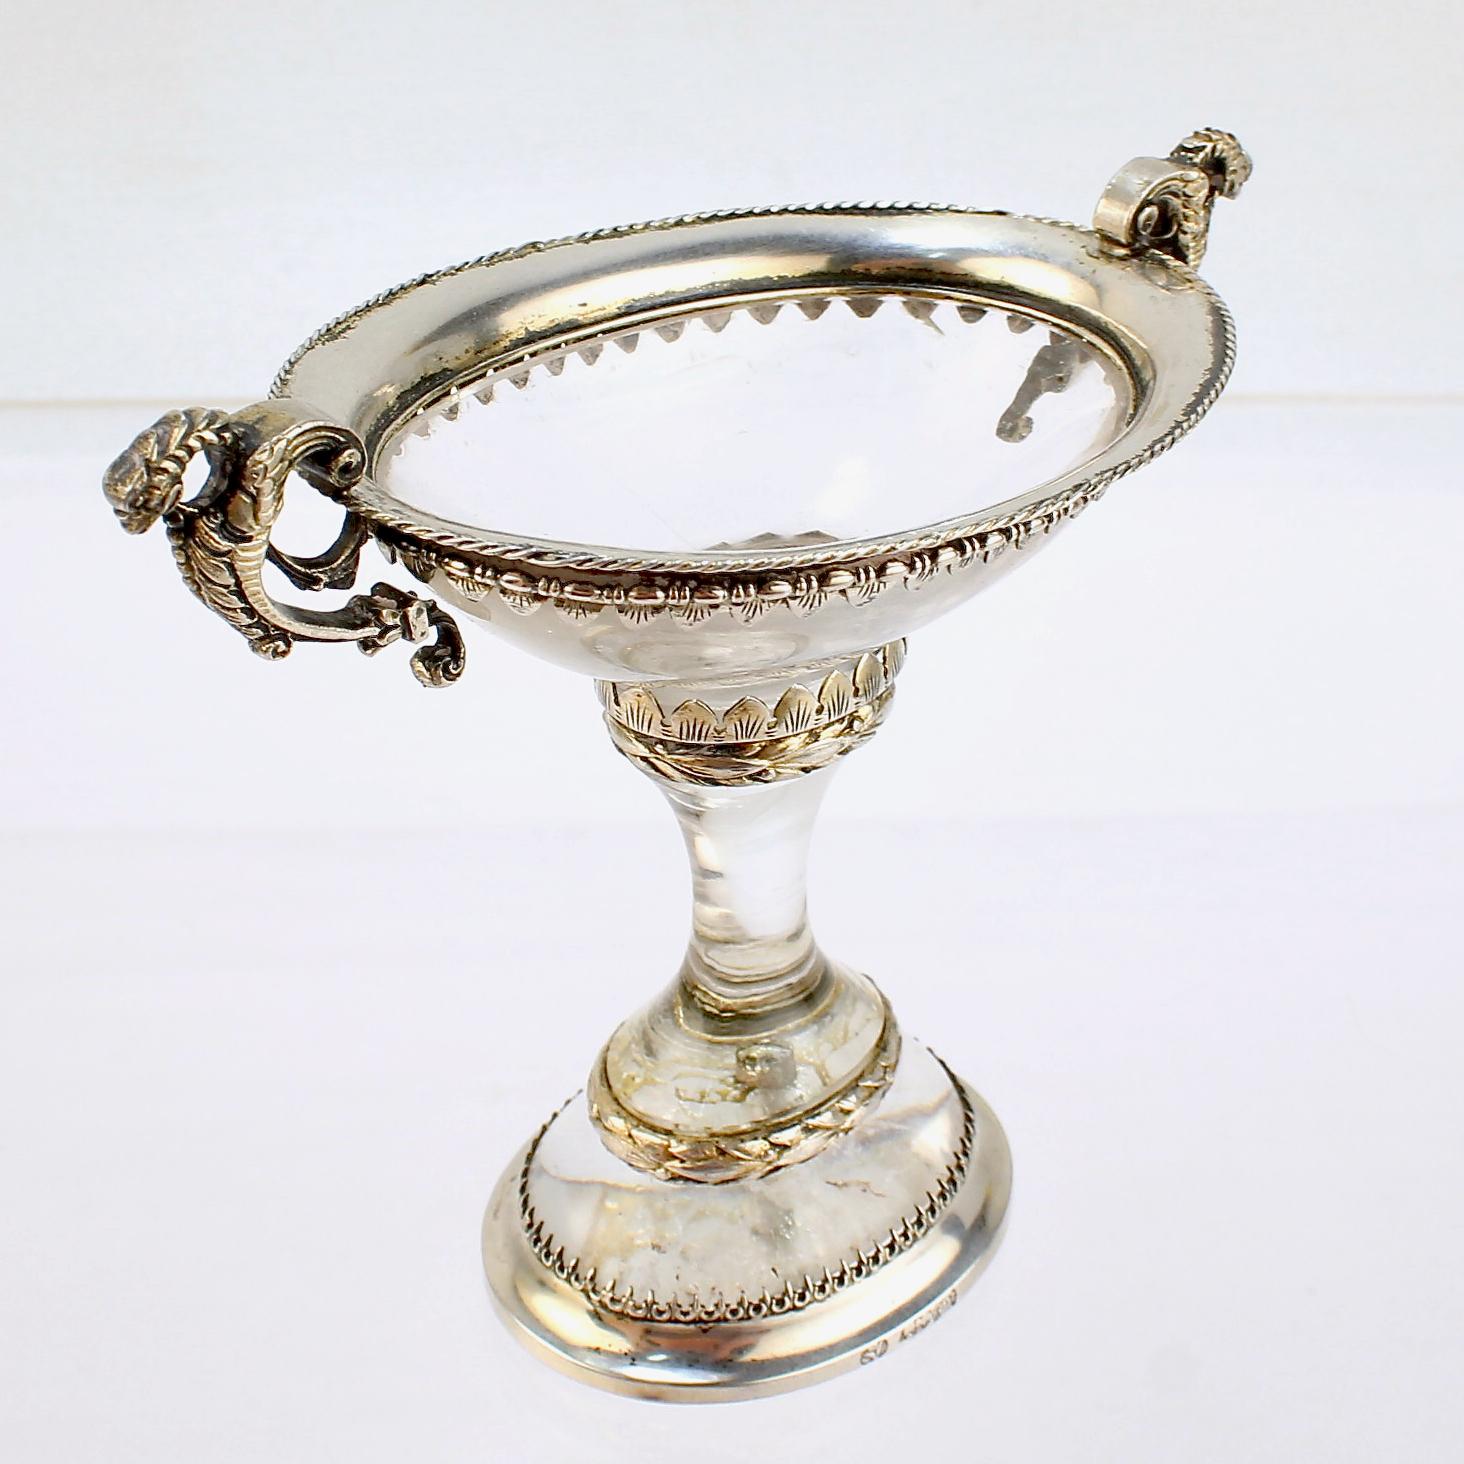 A fine antique Austrian salt cellar or miniature tazza.

Comprising 3 carved and polished rock crystal sections.

Mounted with ornate silver mounts - the top section having 2 dragon handles.

Simply an amazing antique rock crystal objet